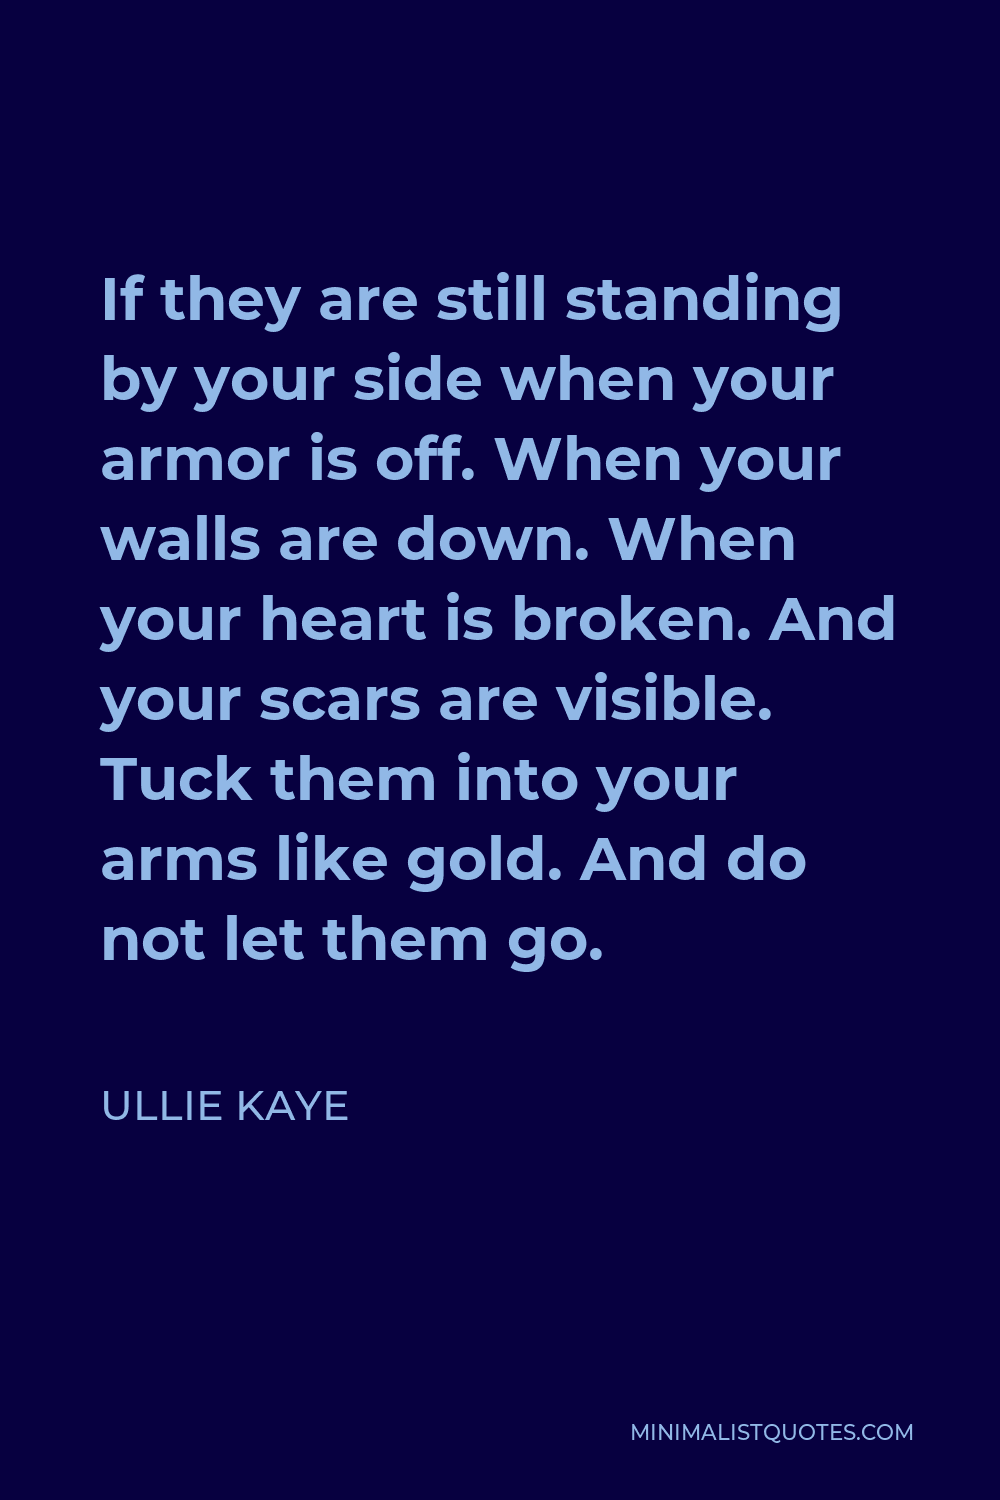 Ullie Kaye Quote - If they are still standing by your side when your armor is off. When your walls are down. When your heart is broken. And your scars are visible. Tuck them into your arms like gold. And do not let them go.